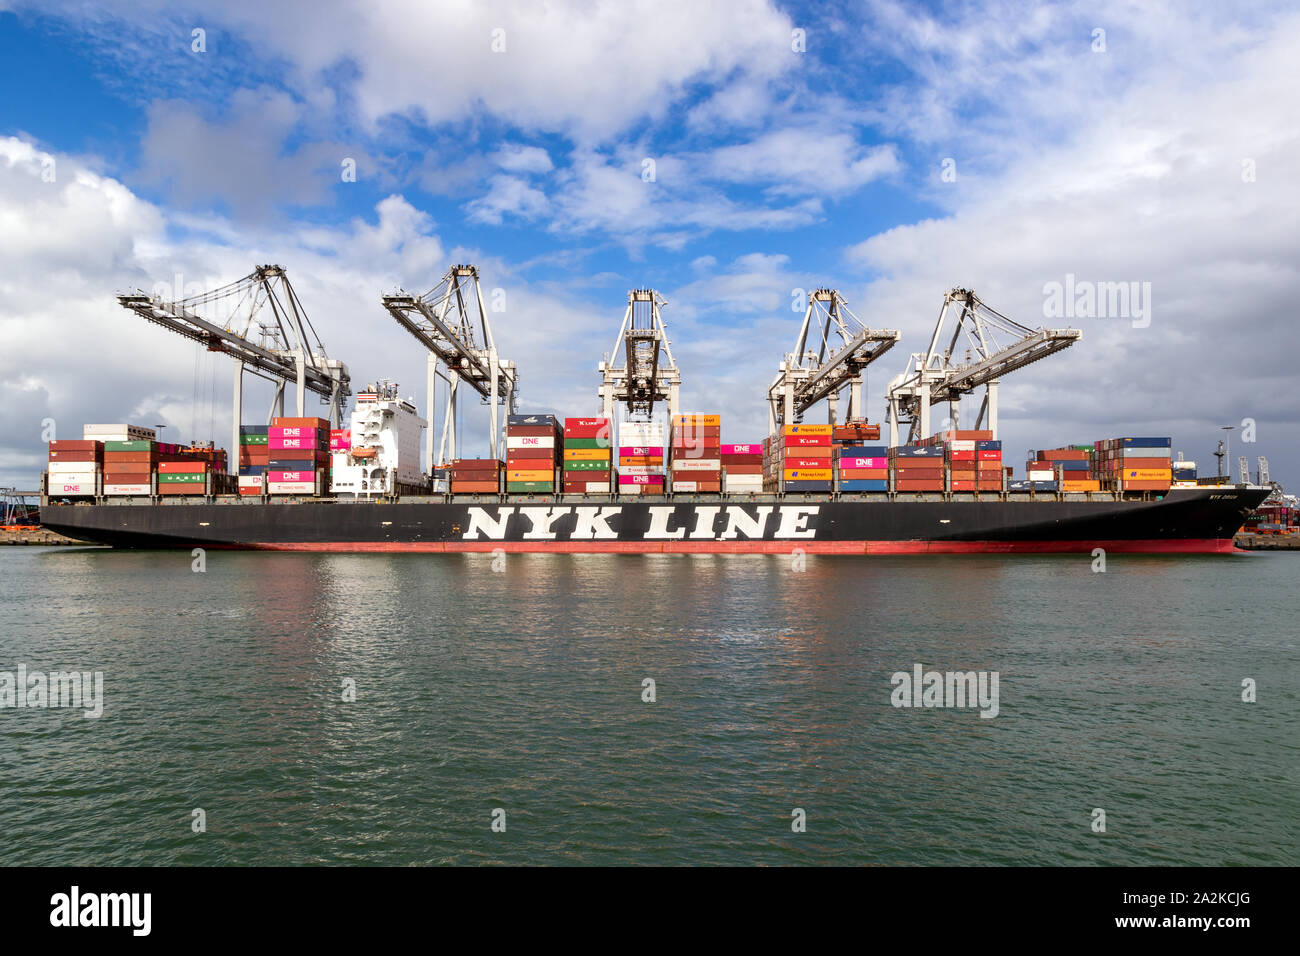 ROTTERDAM, THE NETHERLANDS - SEP 8, 2019: Nyk Line container ship is being loaded by cranes in the Port of Rotterdam. Stock Photo